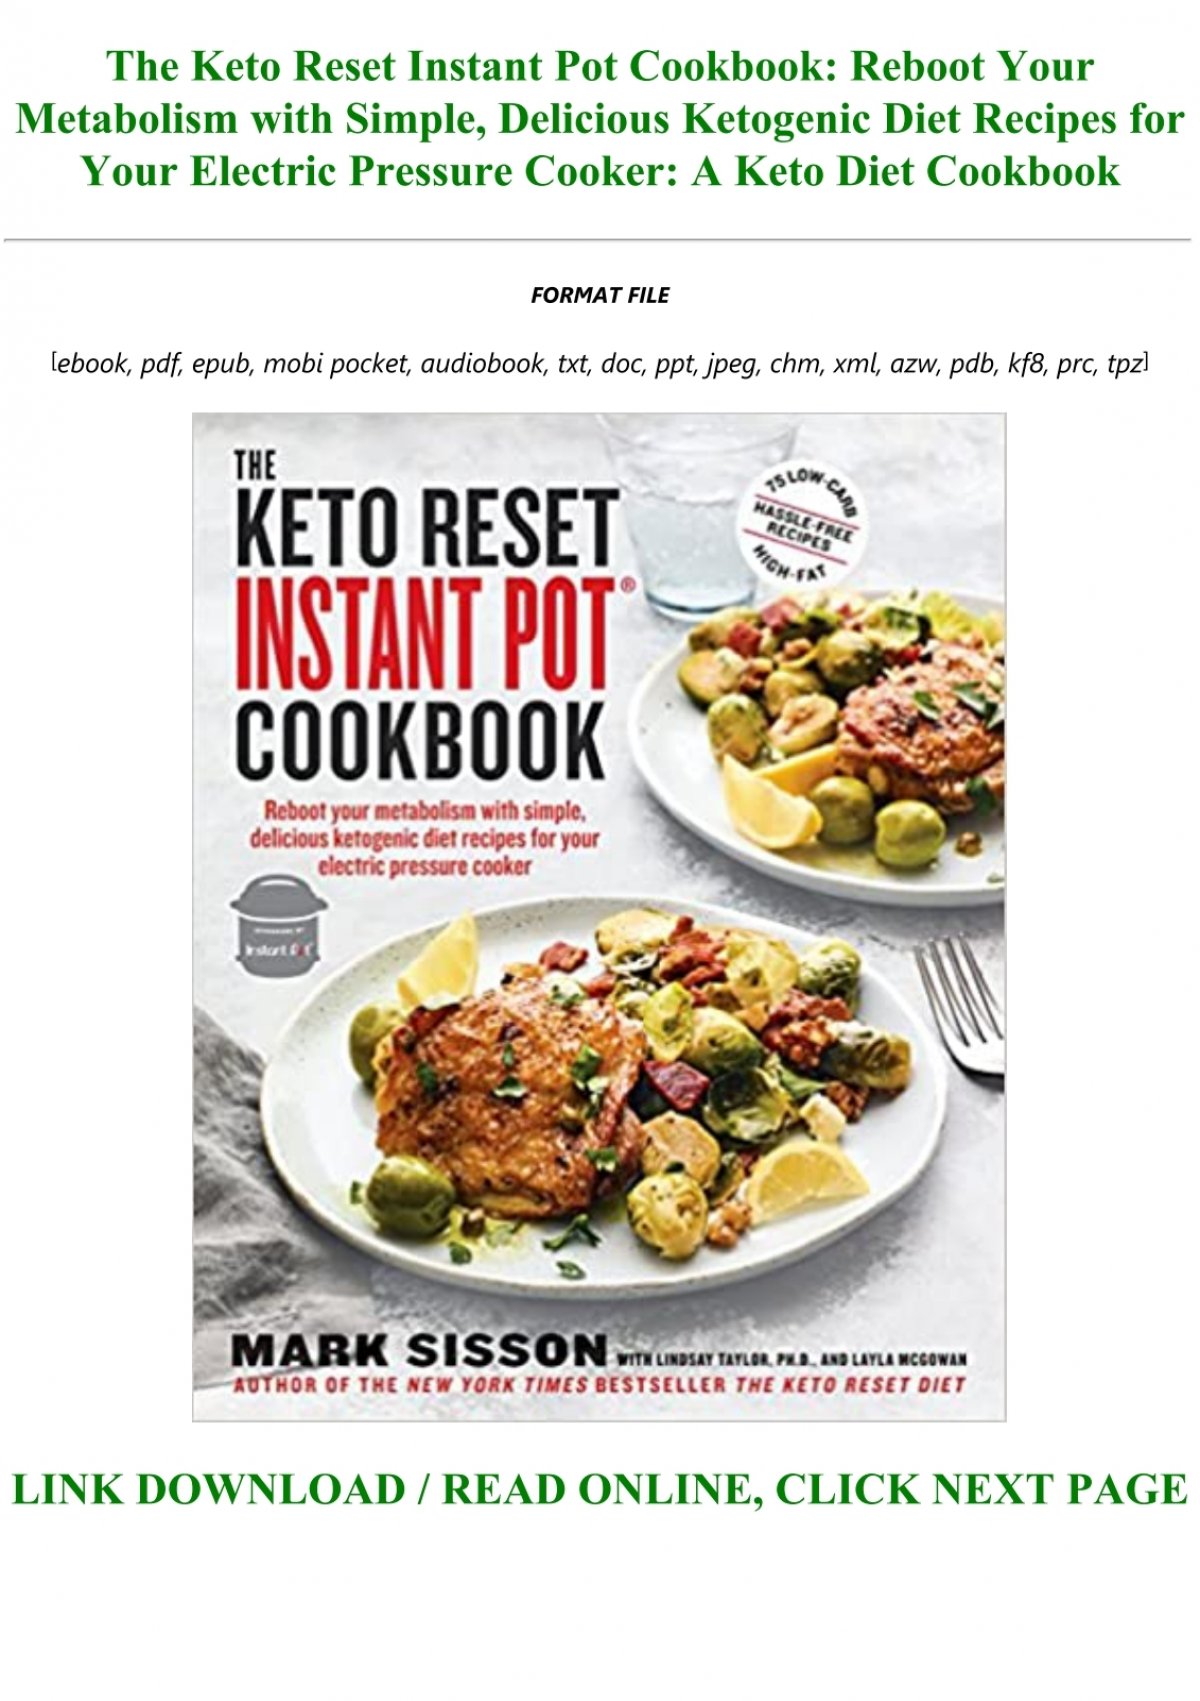 Ebook P D F The Keto Reset Instant Pot Cookbook Reboot Your Metabolism With Simple Delicious Ketogenic Diet Recipes For Your Electric Pressure Cooker A Keto Diet Cookbook Full Pdf